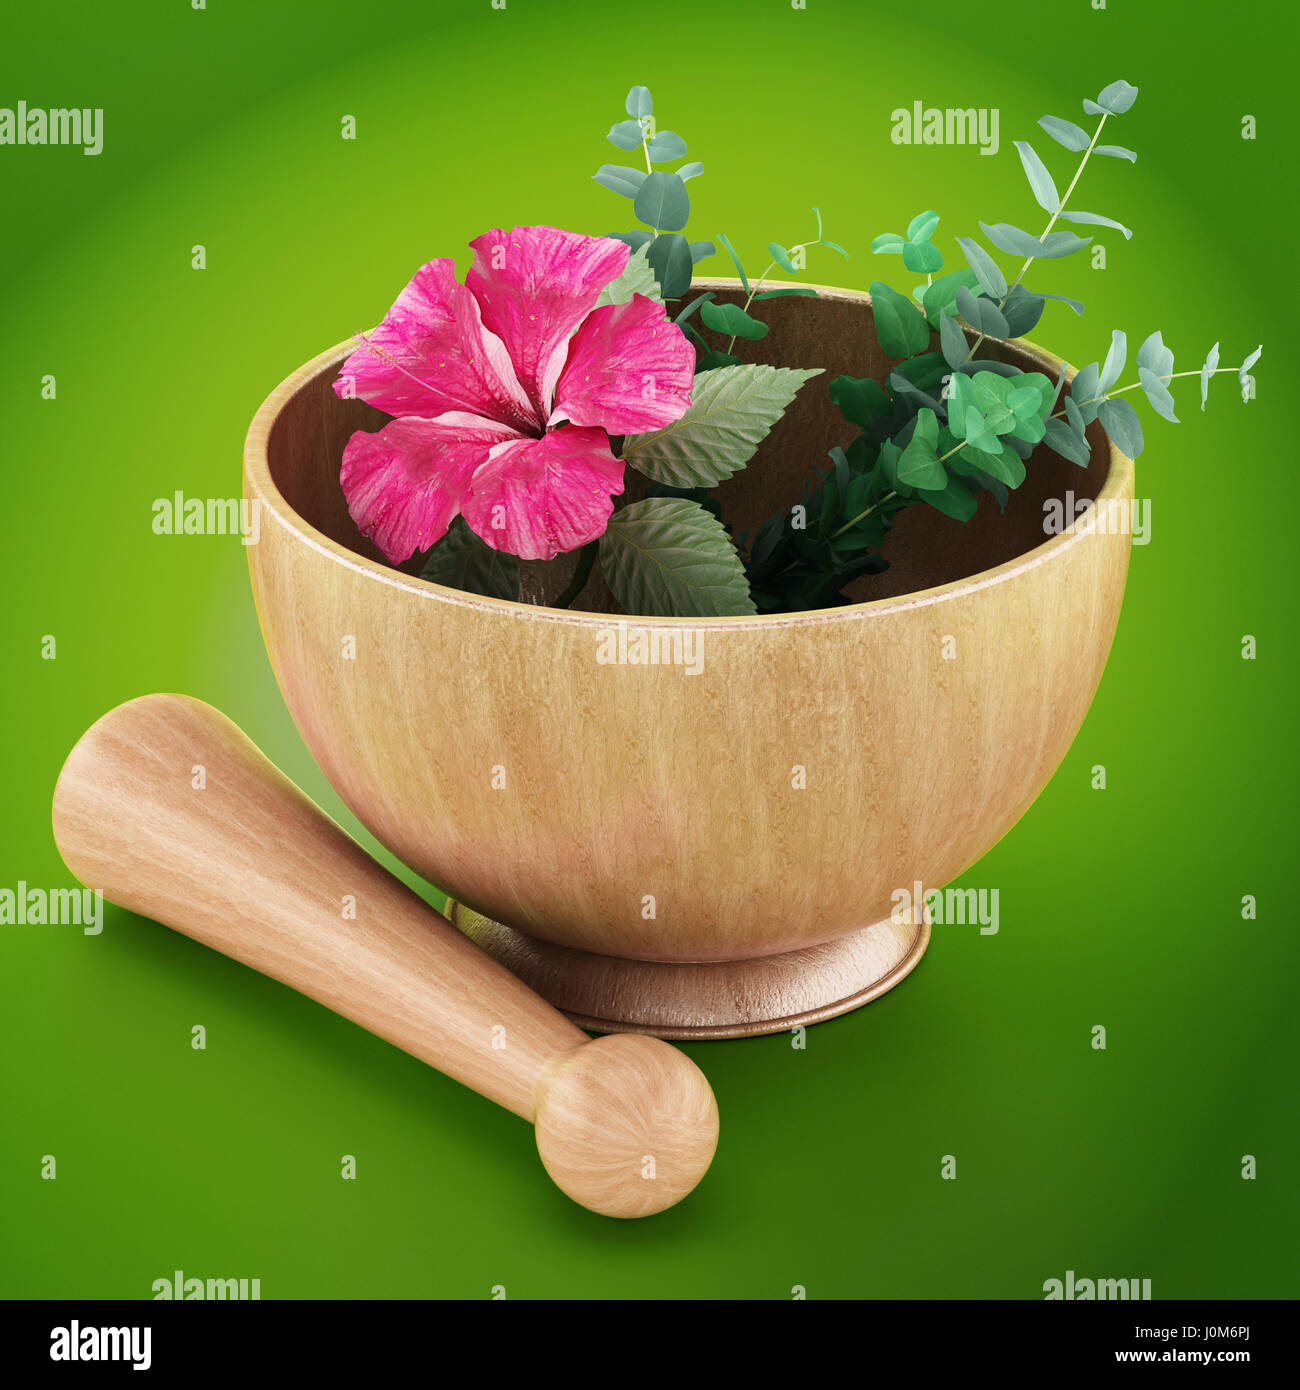 Mortar, pestle and flower isolated on green background. 3D illustration. Stock Photo